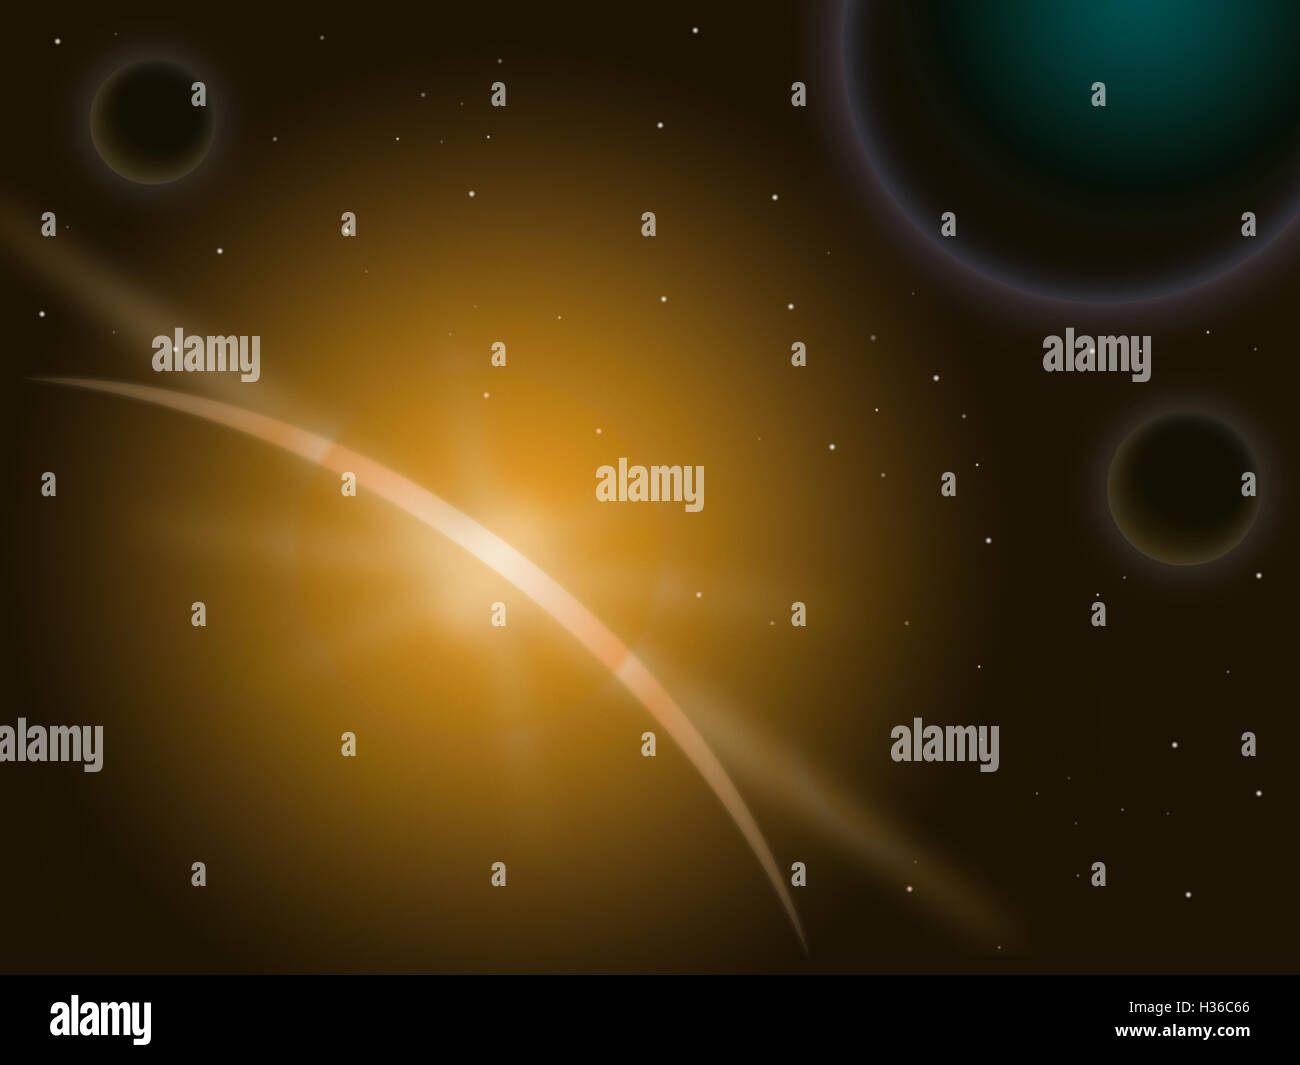 Orange Star Behind Planet Shows Galaxy Atmosphere And Universe Stock Photo